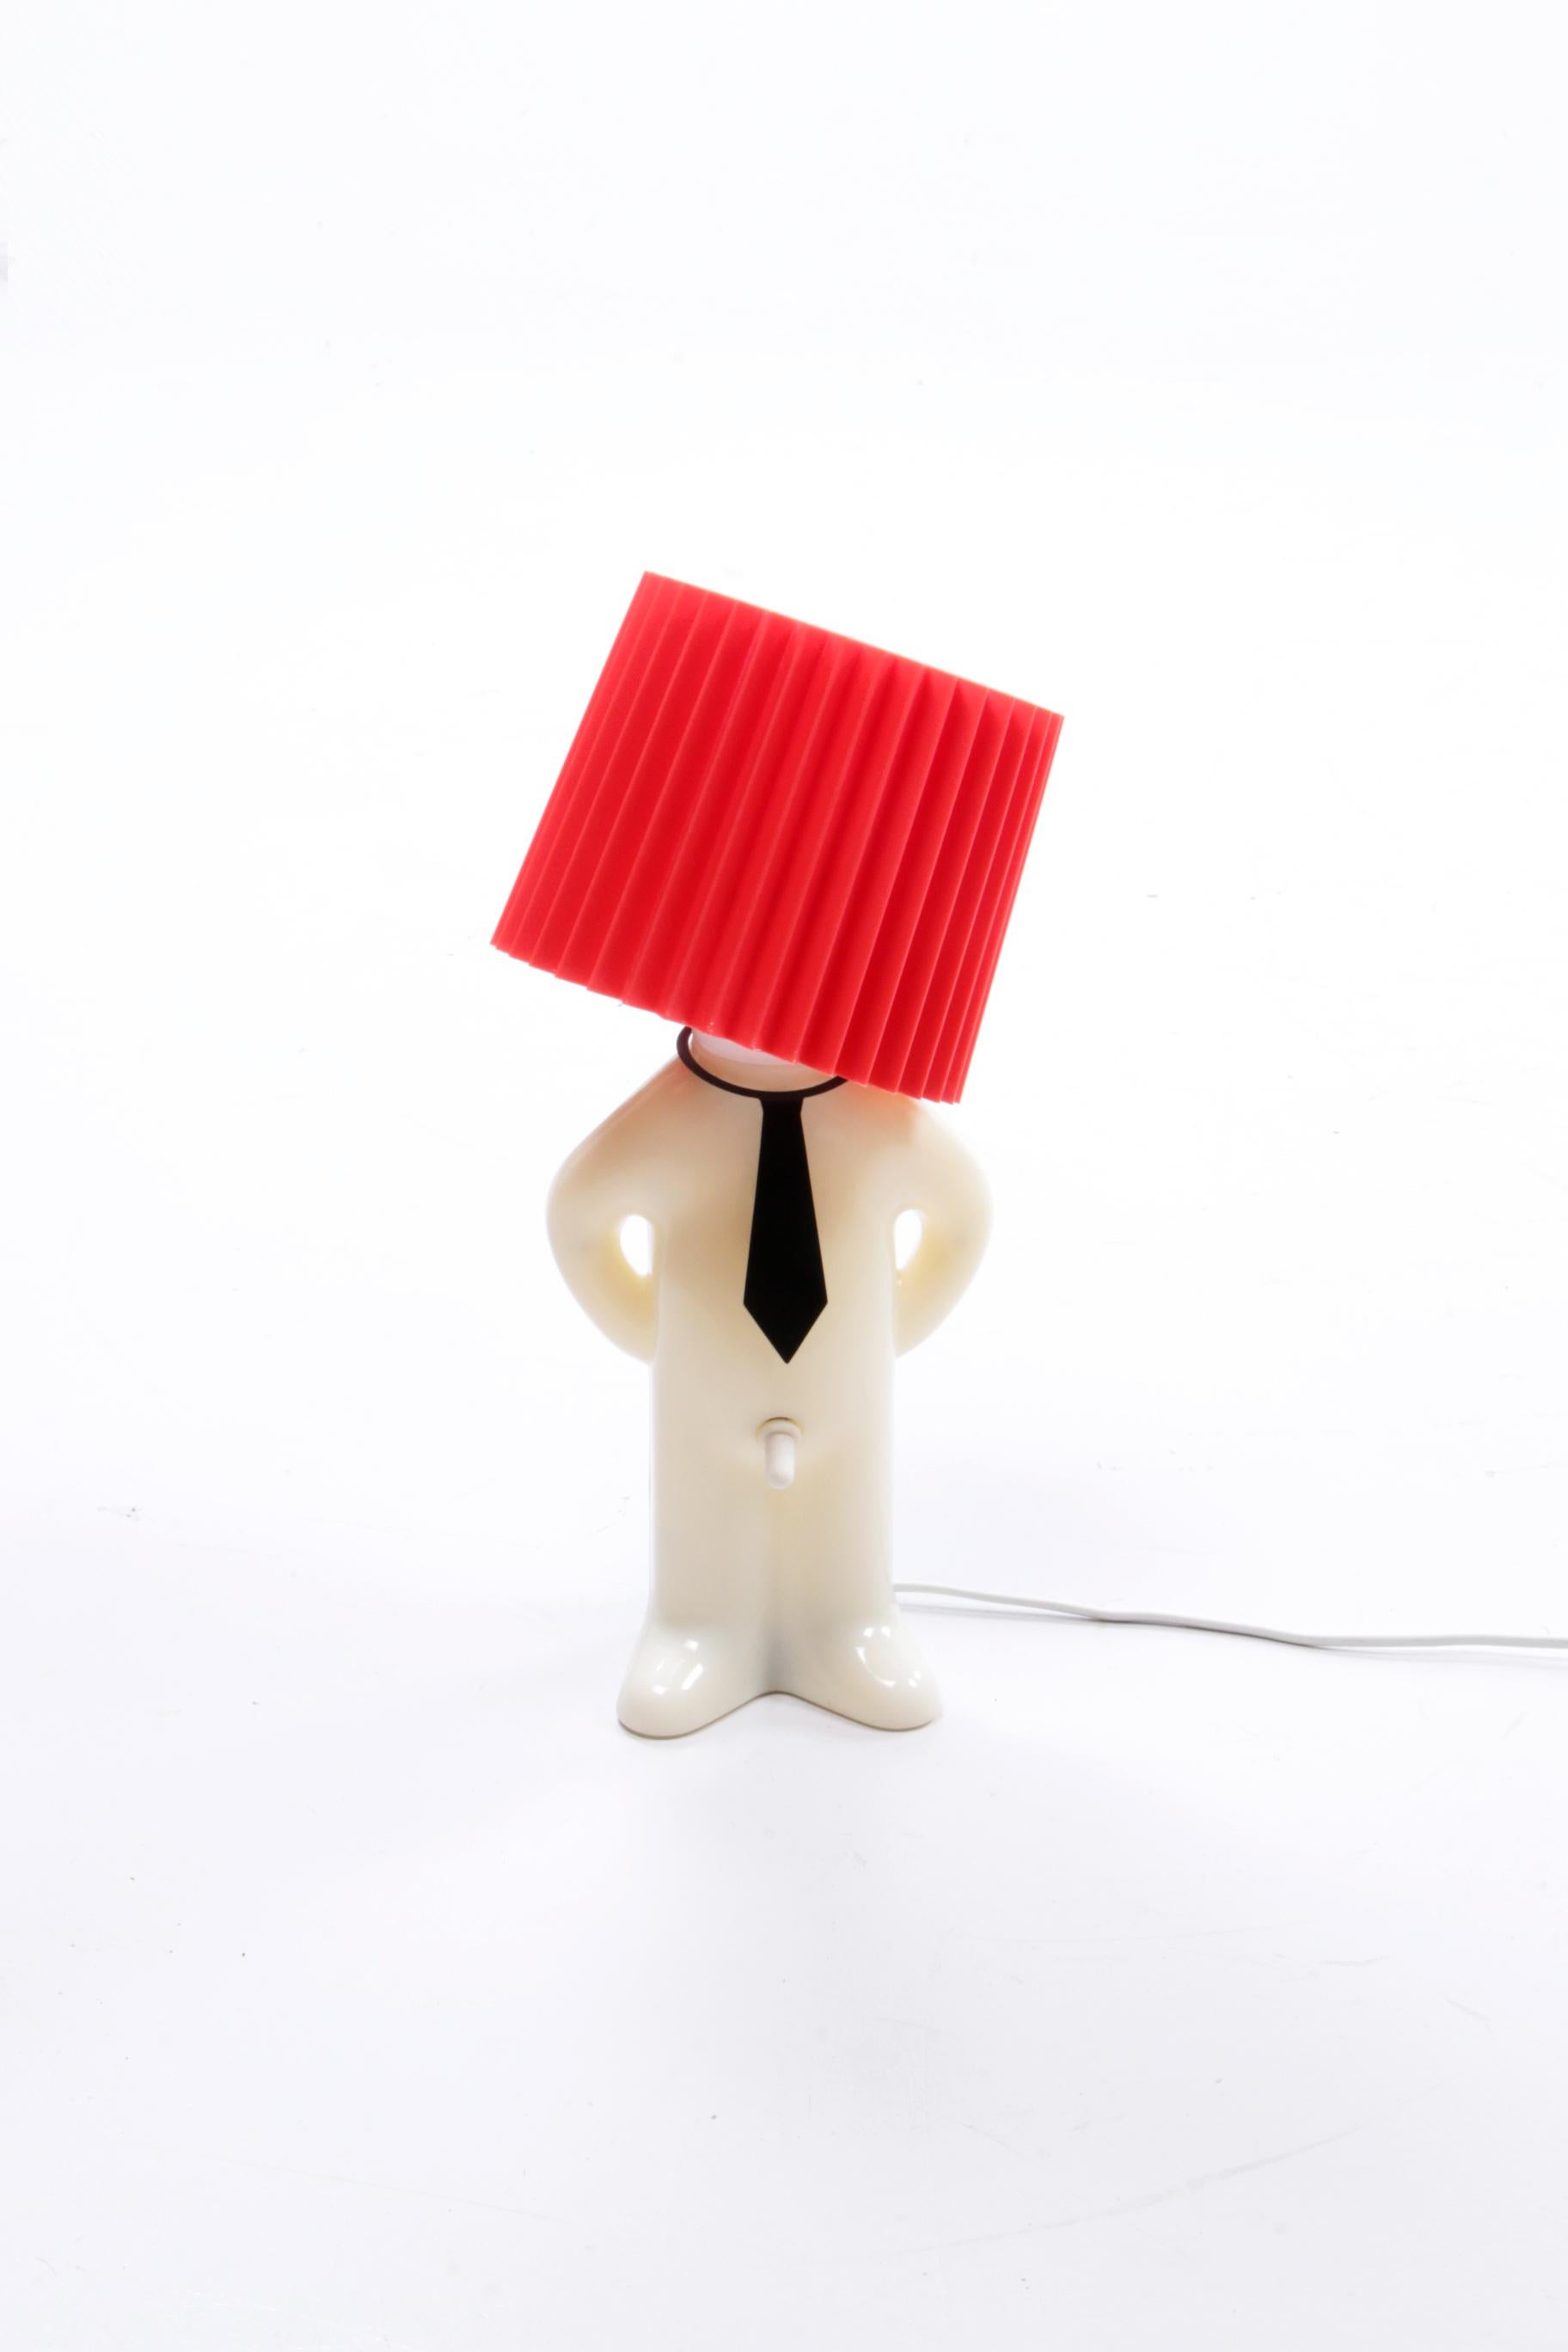 Exciting table lamp by Mister Pee with switch, 1970 Denmark

How nice is this you can turn this boy on and off in a funny way.

The hood is loose on it so that he does not have to be ashamed.

Super nice night light and a nice gift idea, we